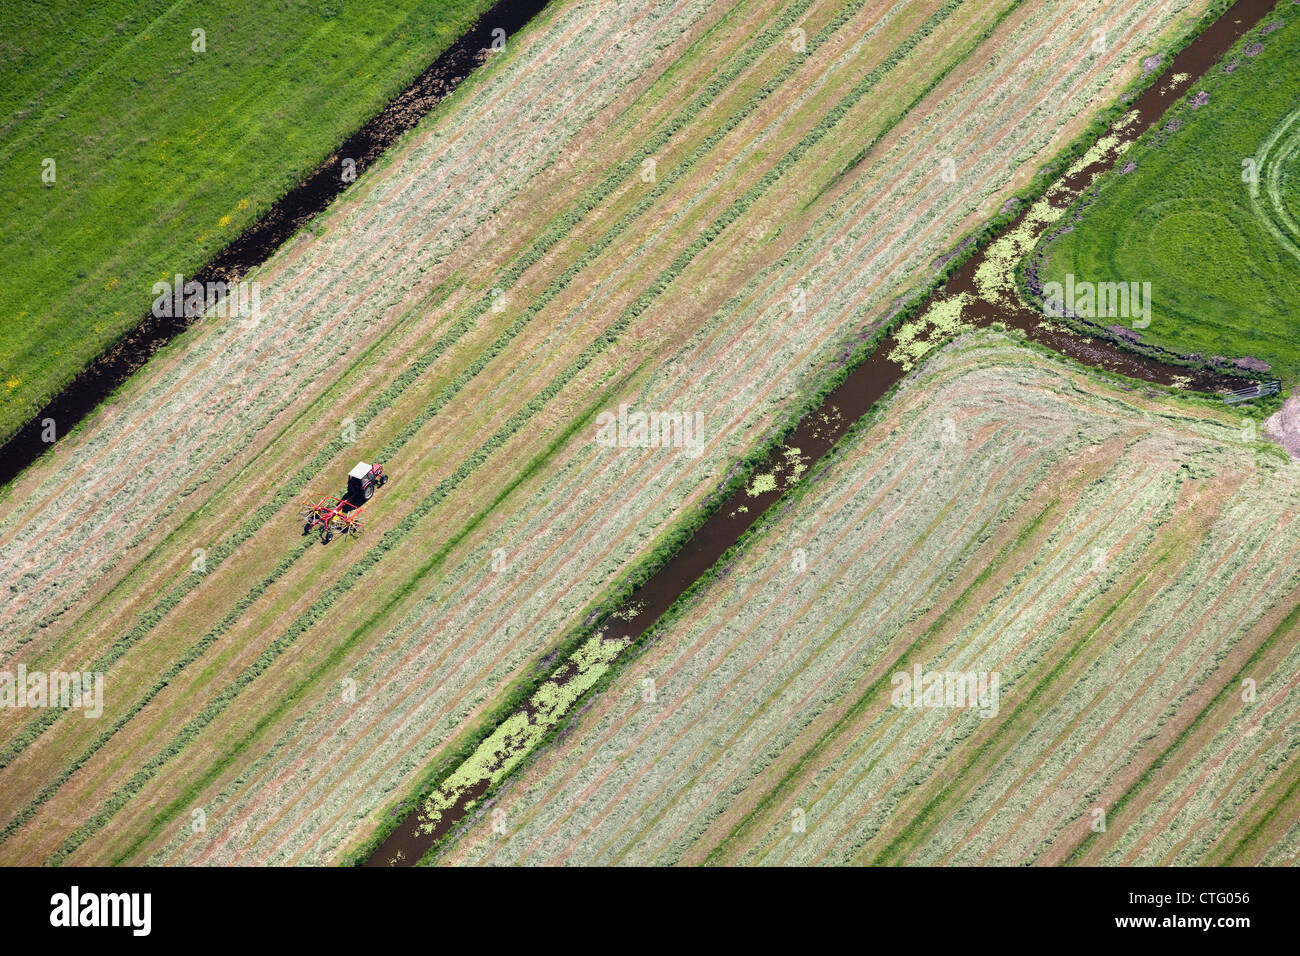 The Netherlands, Zuiderwoude. Aerial. Collecting grass with tractor. Stock Photo